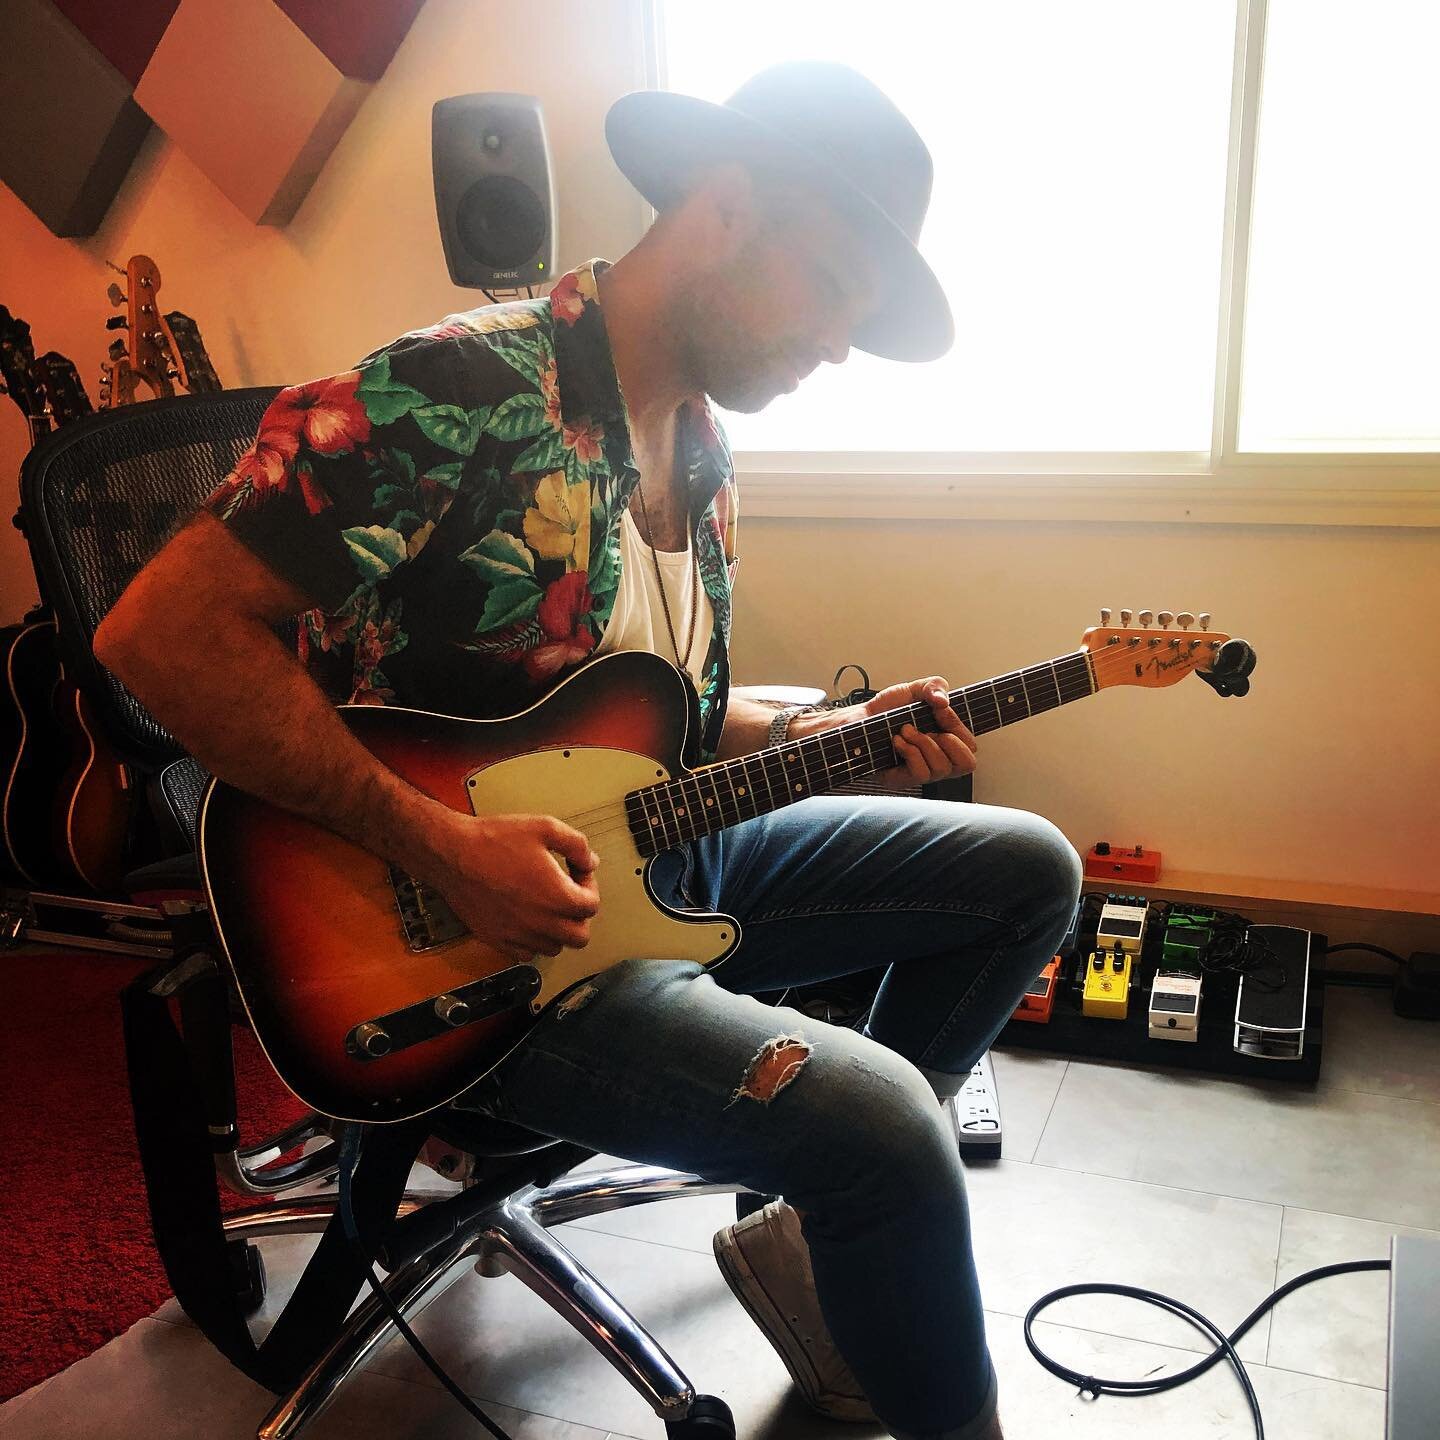 Cooking up something new 🔥 !!
Can&rsquo;t wait to share it with you guys! Shit I love the sound of this Telecaster! 🎸 
.
.
.
#newmusic #fendertelecaster #fender #therecordhouse #comingsoon